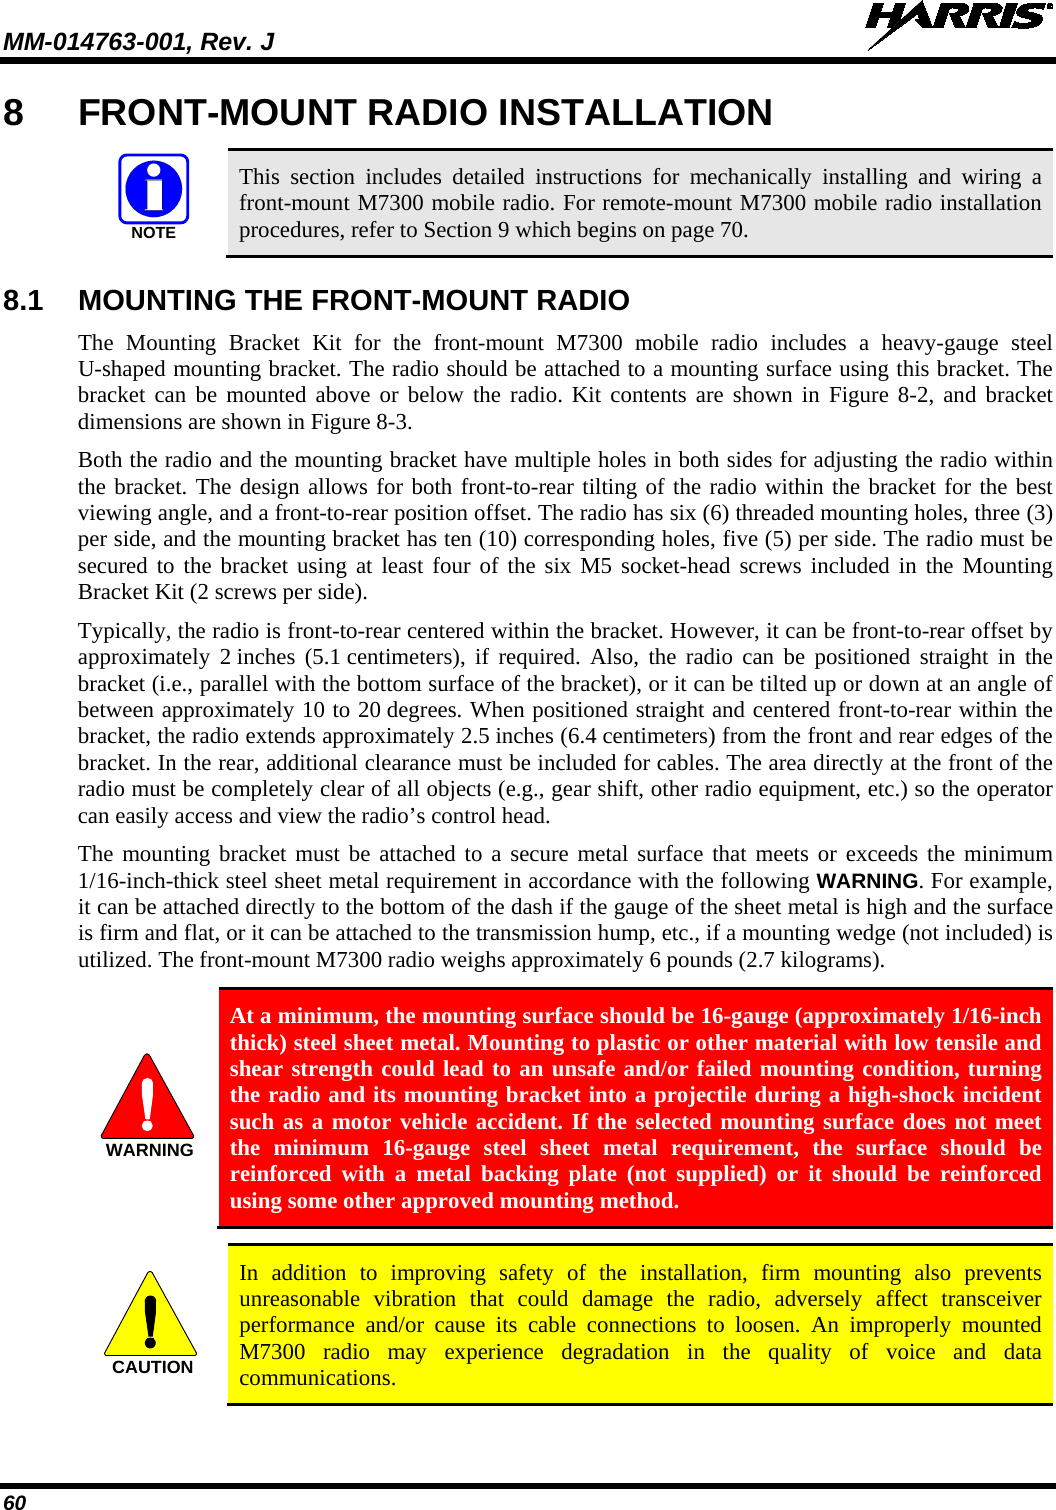 MM-014763-001, Rev. J   60 8  FRONT-MOUNT RADIO INSTALLATION   This section includes detailed instructions for mechanically installing and wiring a front-mount M7300 mobile radio. For remote-mount M7300 mobile radio installation procedures, refer to Section 9 which begins on page 70.  8.1 MOUNTING THE FRONT-MOUNT RADIO The  Mounting Bracket Kit for the front-mount  M7300 mobile radio includes a heavy-gauge steel U-shaped mounting bracket. The radio should be attached to a mounting surface using this bracket. The bracket can be mounted above or below the radio. Kit contents are shown in Figure 8-2, and bracket dimensions are shown in Figure 8-3. Both the radio and the mounting bracket have multiple holes in both sides for adjusting the radio within the bracket. The design allows for both front-to-rear tilting of the radio within the bracket for the best viewing angle, and a front-to-rear position offset. The radio has six (6) threaded mounting holes, three (3) per side, and the mounting bracket has ten (10) corresponding holes, five (5) per side. The radio must be secured to the bracket using at least four of the six M5 socket-head screws included in the Mounting Bracket Kit (2 screws per side). Typically, the radio is front-to-rear centered within the bracket. However, it can be front-to-rear offset by approximately  2 inches  (5.1 centimeters),  if required. Also, the radio can be positioned straight in the bracket (i.e., parallel with the bottom surface of the bracket), or it can be tilted up or down at an angle of between approximately 10 to 20 degrees. When positioned straight and centered front-to-rear within the bracket, the radio extends approximately 2.5 inches (6.4 centimeters) from the front and rear edges of the bracket. In the rear, additional clearance must be included for cables. The area directly at the front of the radio must be completely clear of all objects (e.g., gear shift, other radio equipment, etc.) so the operator can easily access and view the radio’s control head. The mounting bracket must be attached to a secure metal surface that meets or exceeds the minimum 1/16-inch-thick steel sheet metal requirement in accordance with the following WARNING. For example, it can be attached directly to the bottom of the dash if the gauge of the sheet metal is high and the surface is firm and flat, or it can be attached to the transmission hump, etc., if a mounting wedge (not included) is utilized. The front-mount M7300 radio weighs approximately 6 pounds (2.7 kilograms).   At a minimum, the mounting surface should be 16-gauge (approximately 1/16-inch thick) steel sheet metal. Mounting to plastic or other material with low tensile and shear strength could lead to an unsafe and/or failed mounting condition, turning the radio and its mounting bracket into a projectile during a high-shock incident such as a motor vehicle accident. If the selected mounting surface does not meet the minimum 16-gauge steel sheet metal requirement, the surface should be reinforced with a metal backing plate (not supplied) or it should be reinforced using some other approved mounting method.   In addition to improving safety of the installation, firm mounting also prevents unreasonable vibration that could damage the radio, adversely affect transceiver performance and/or cause its cable connections to loosen. An improperly mounted M7300 radio may experience degradation in the quality of voice and data communications.  NOTEWARNINGCAUTION